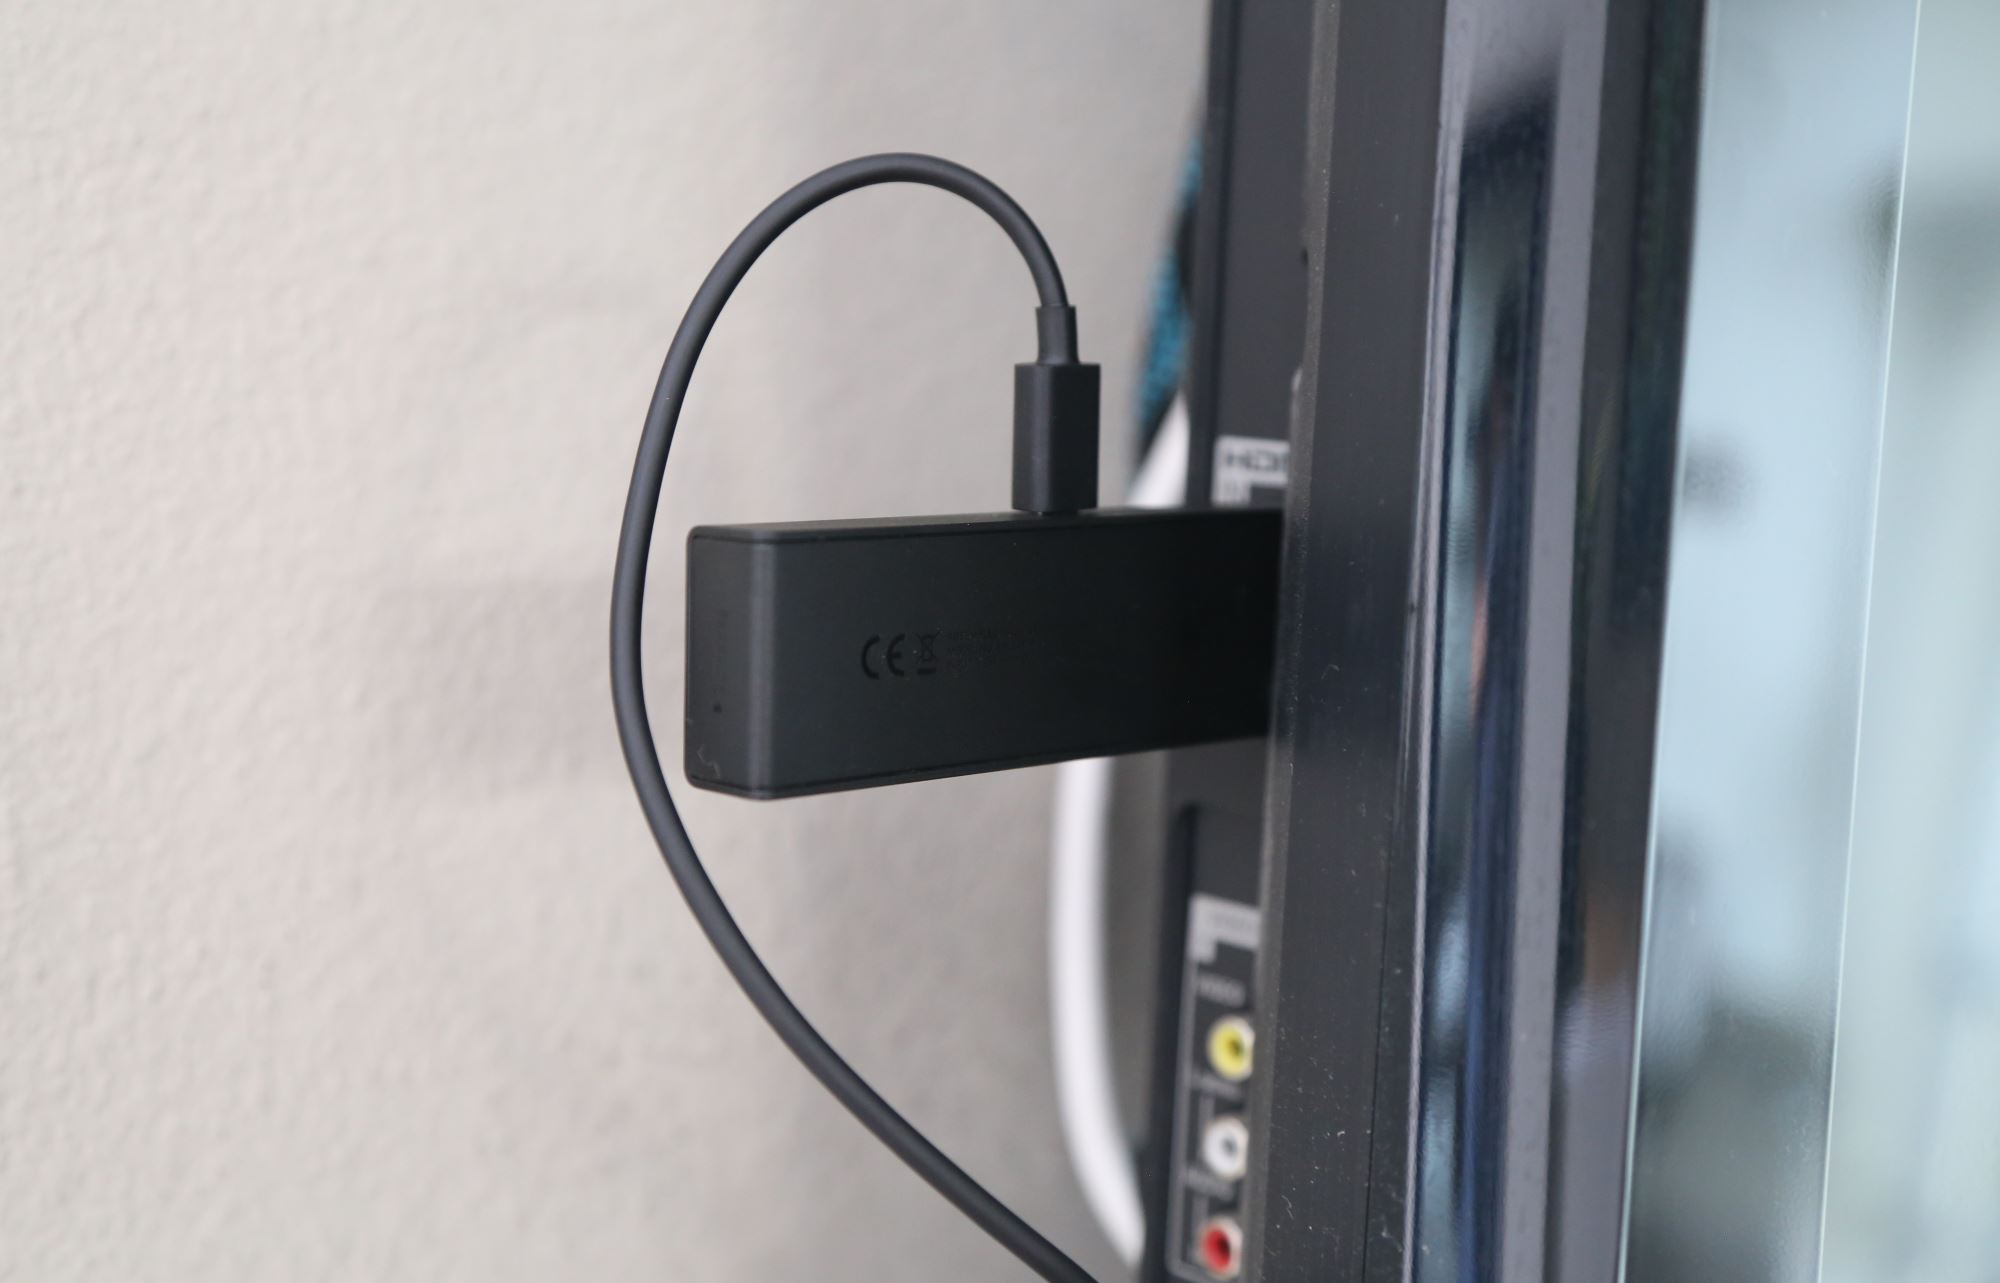 The Fire TV Stick plugged directly into the side of my TV.